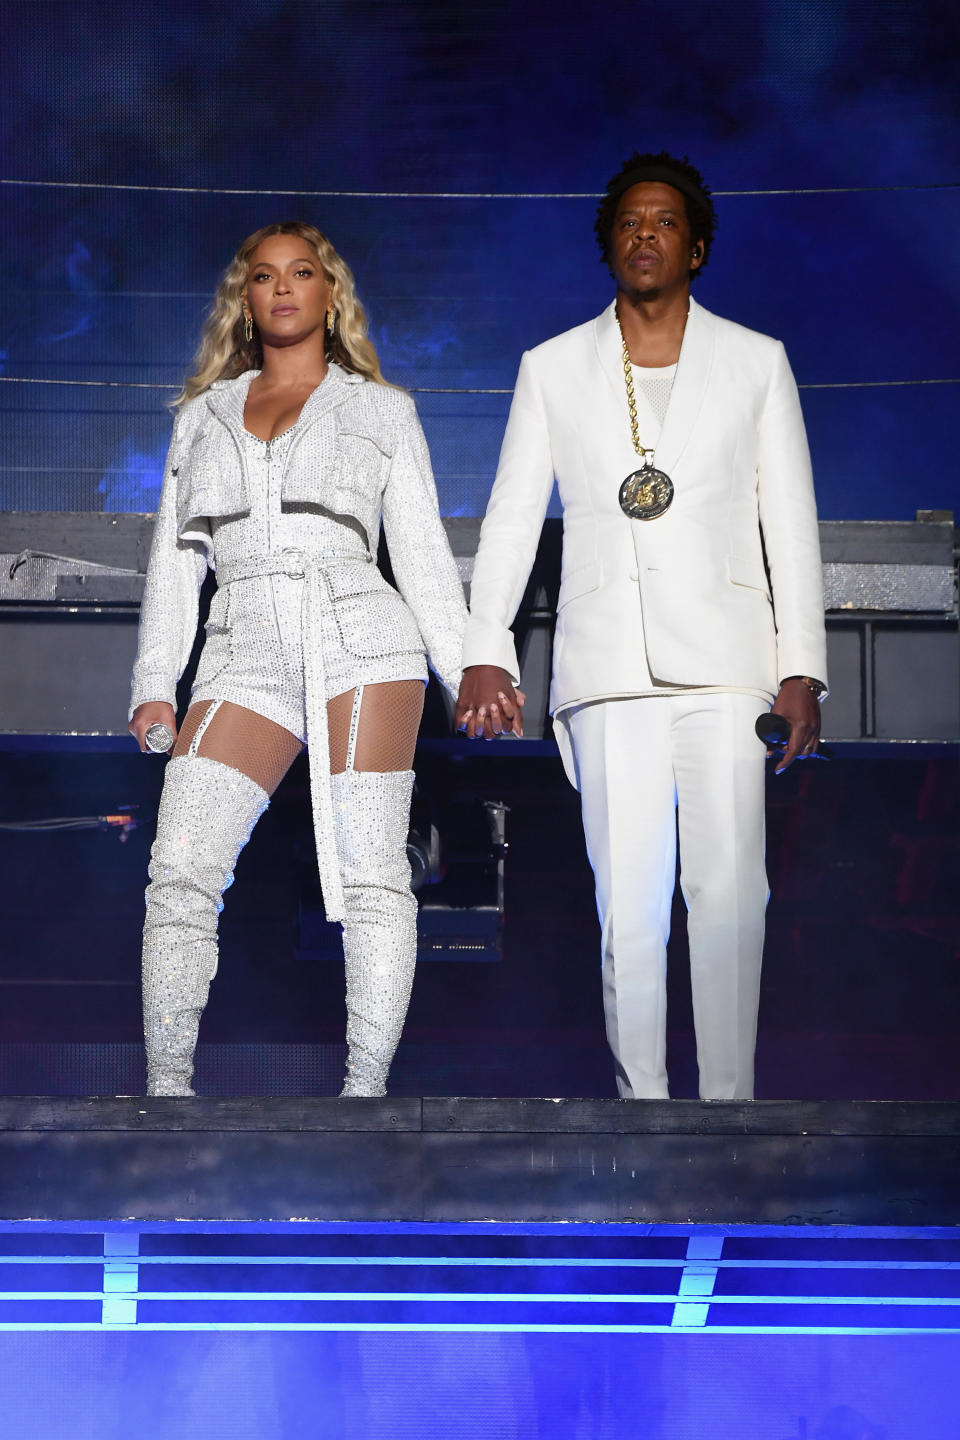 Beyonc&eacute; and Jay Z make up one of the most stylish couples around. It makes sense, then, that when they decide to tour together, their show costumes are perfectly coordinated. In this photo, the two stand on stage during a performance in Cleveland in 2018.